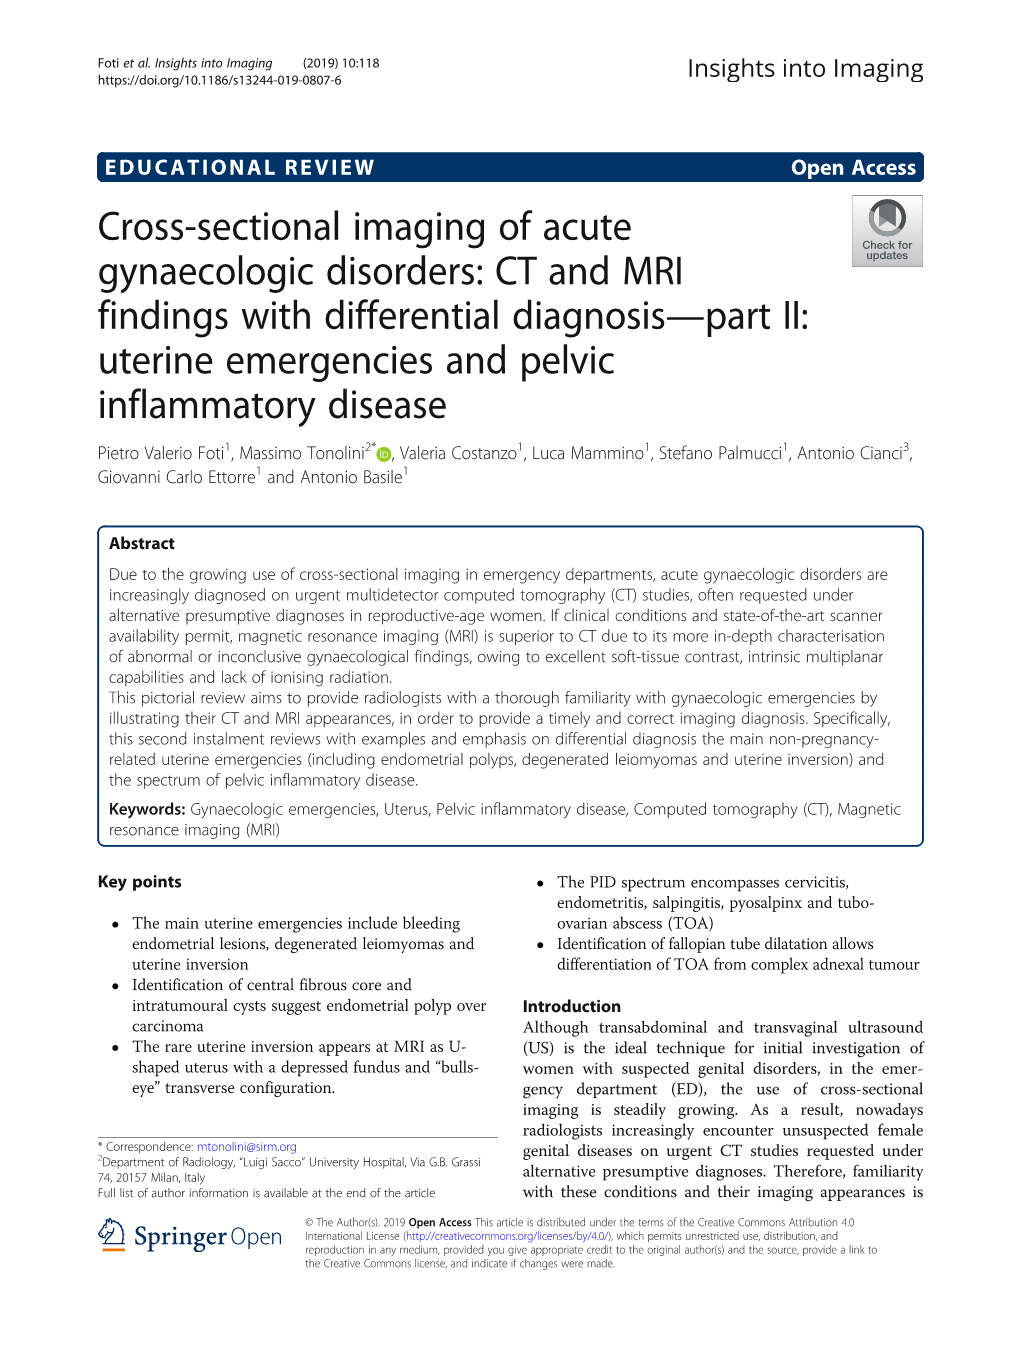 Cross-Sectional Imaging of Acute Gynaecologic Disorders: CT and MRI Findings with Differential Diagnosis—Part II: Uterine Emer